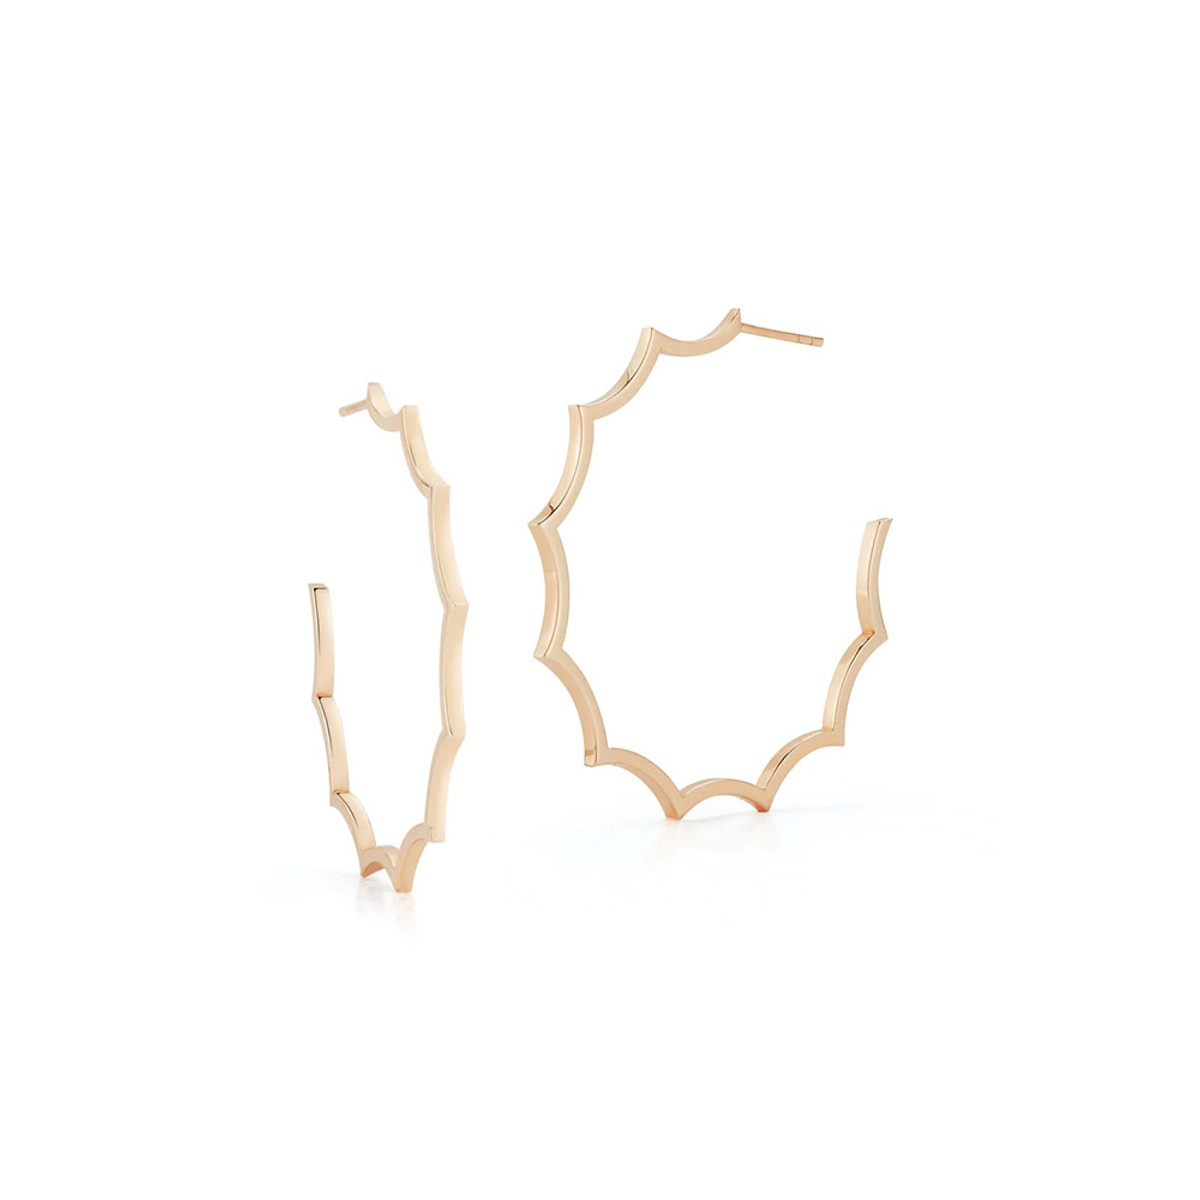 Walters Faith Clive 18K Rose Gold Scalloped Hoop Earrings-58926 Product Image